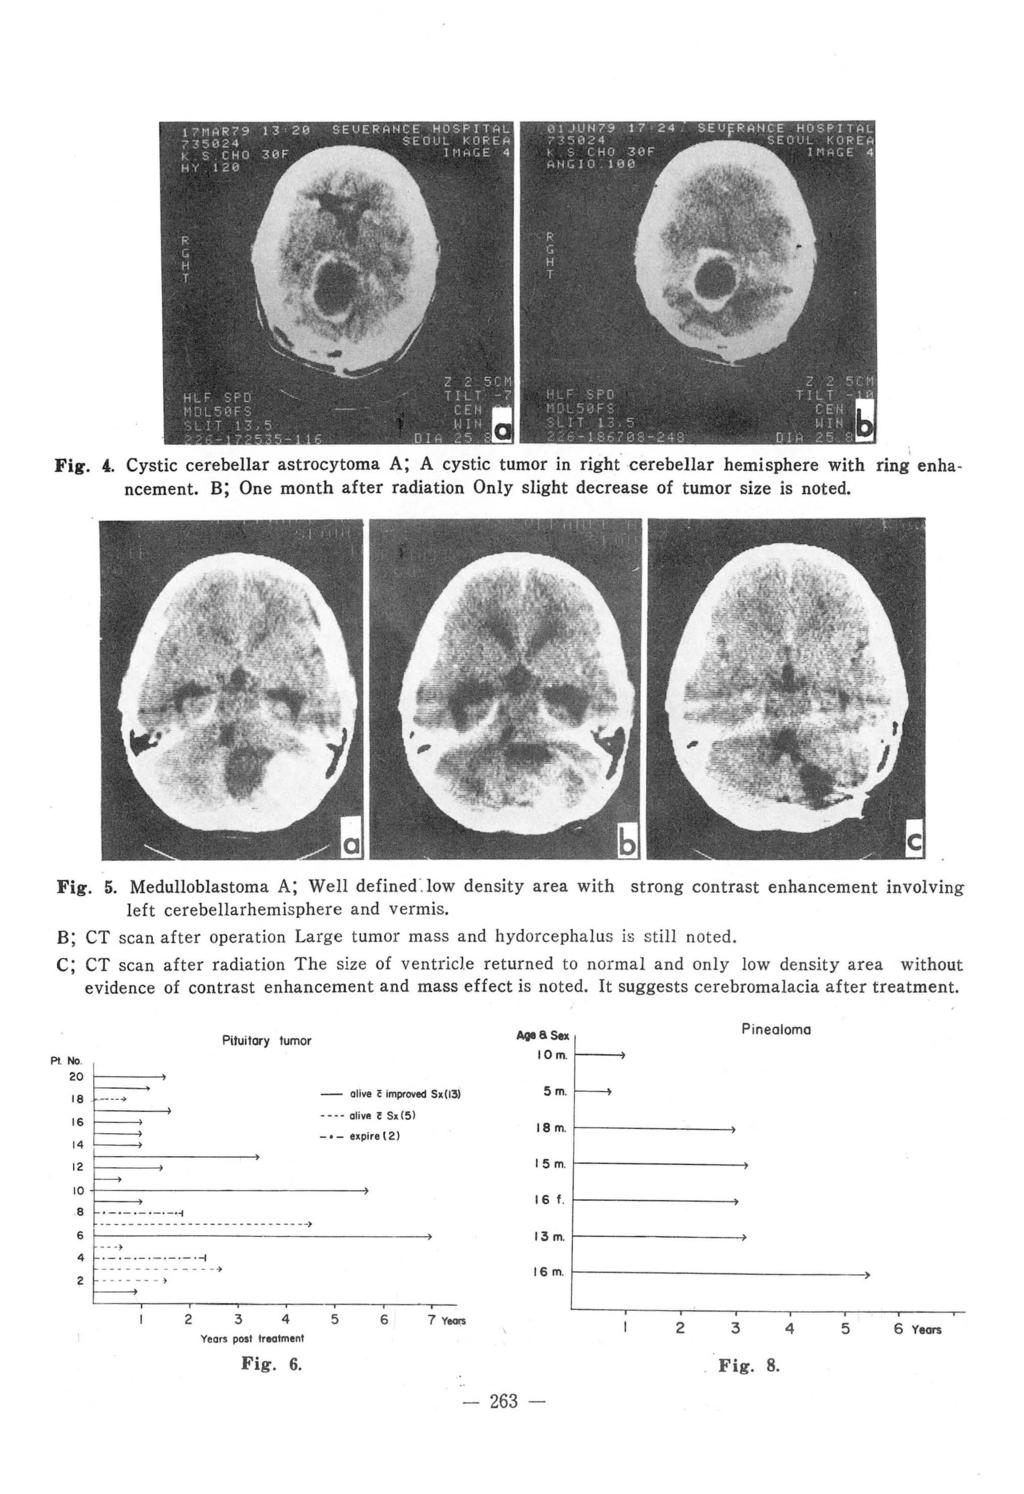 Fig. 4. Cystic cerebellar astrocytoma A; A cystic tumor in right.cerebellar hemisphere with ring enhancement. B; One month after radiation Only slight decrease of tumor size is noted. Fig. 5.